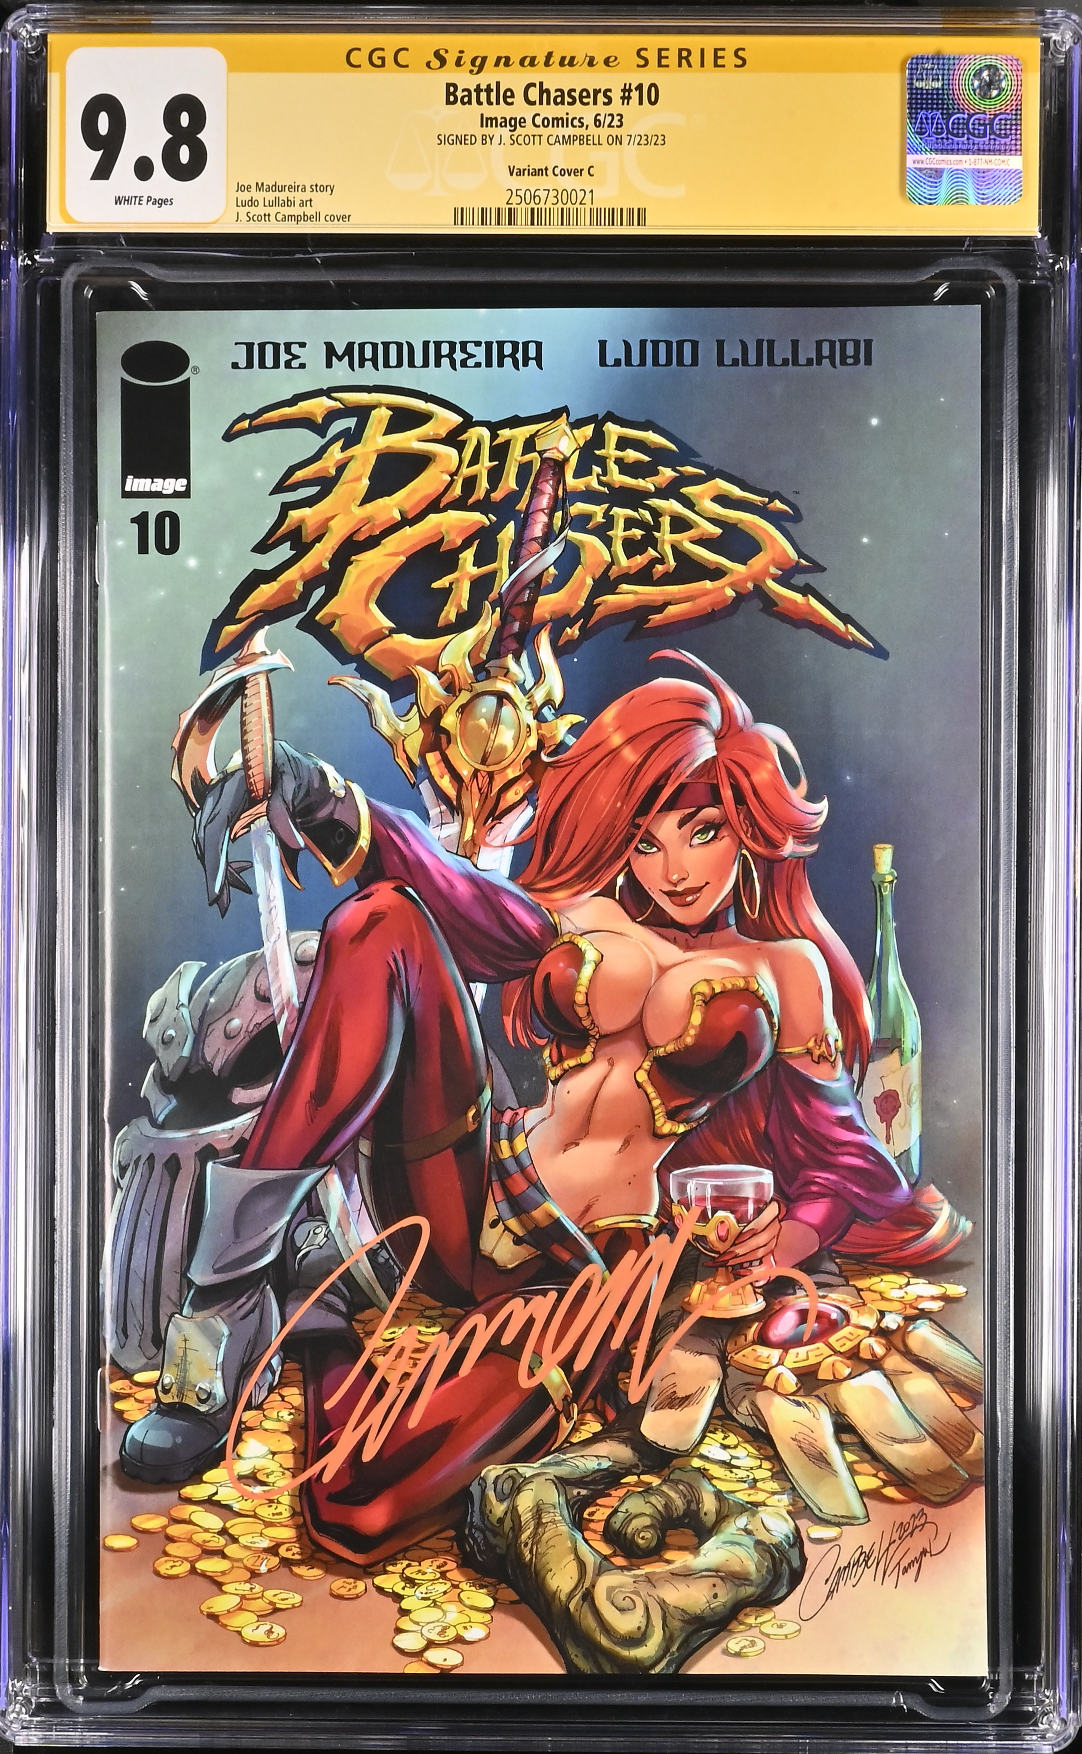 Battle Chasers #10 - Cover C - J. Scott Campbell Variant CGC 9.8 SS